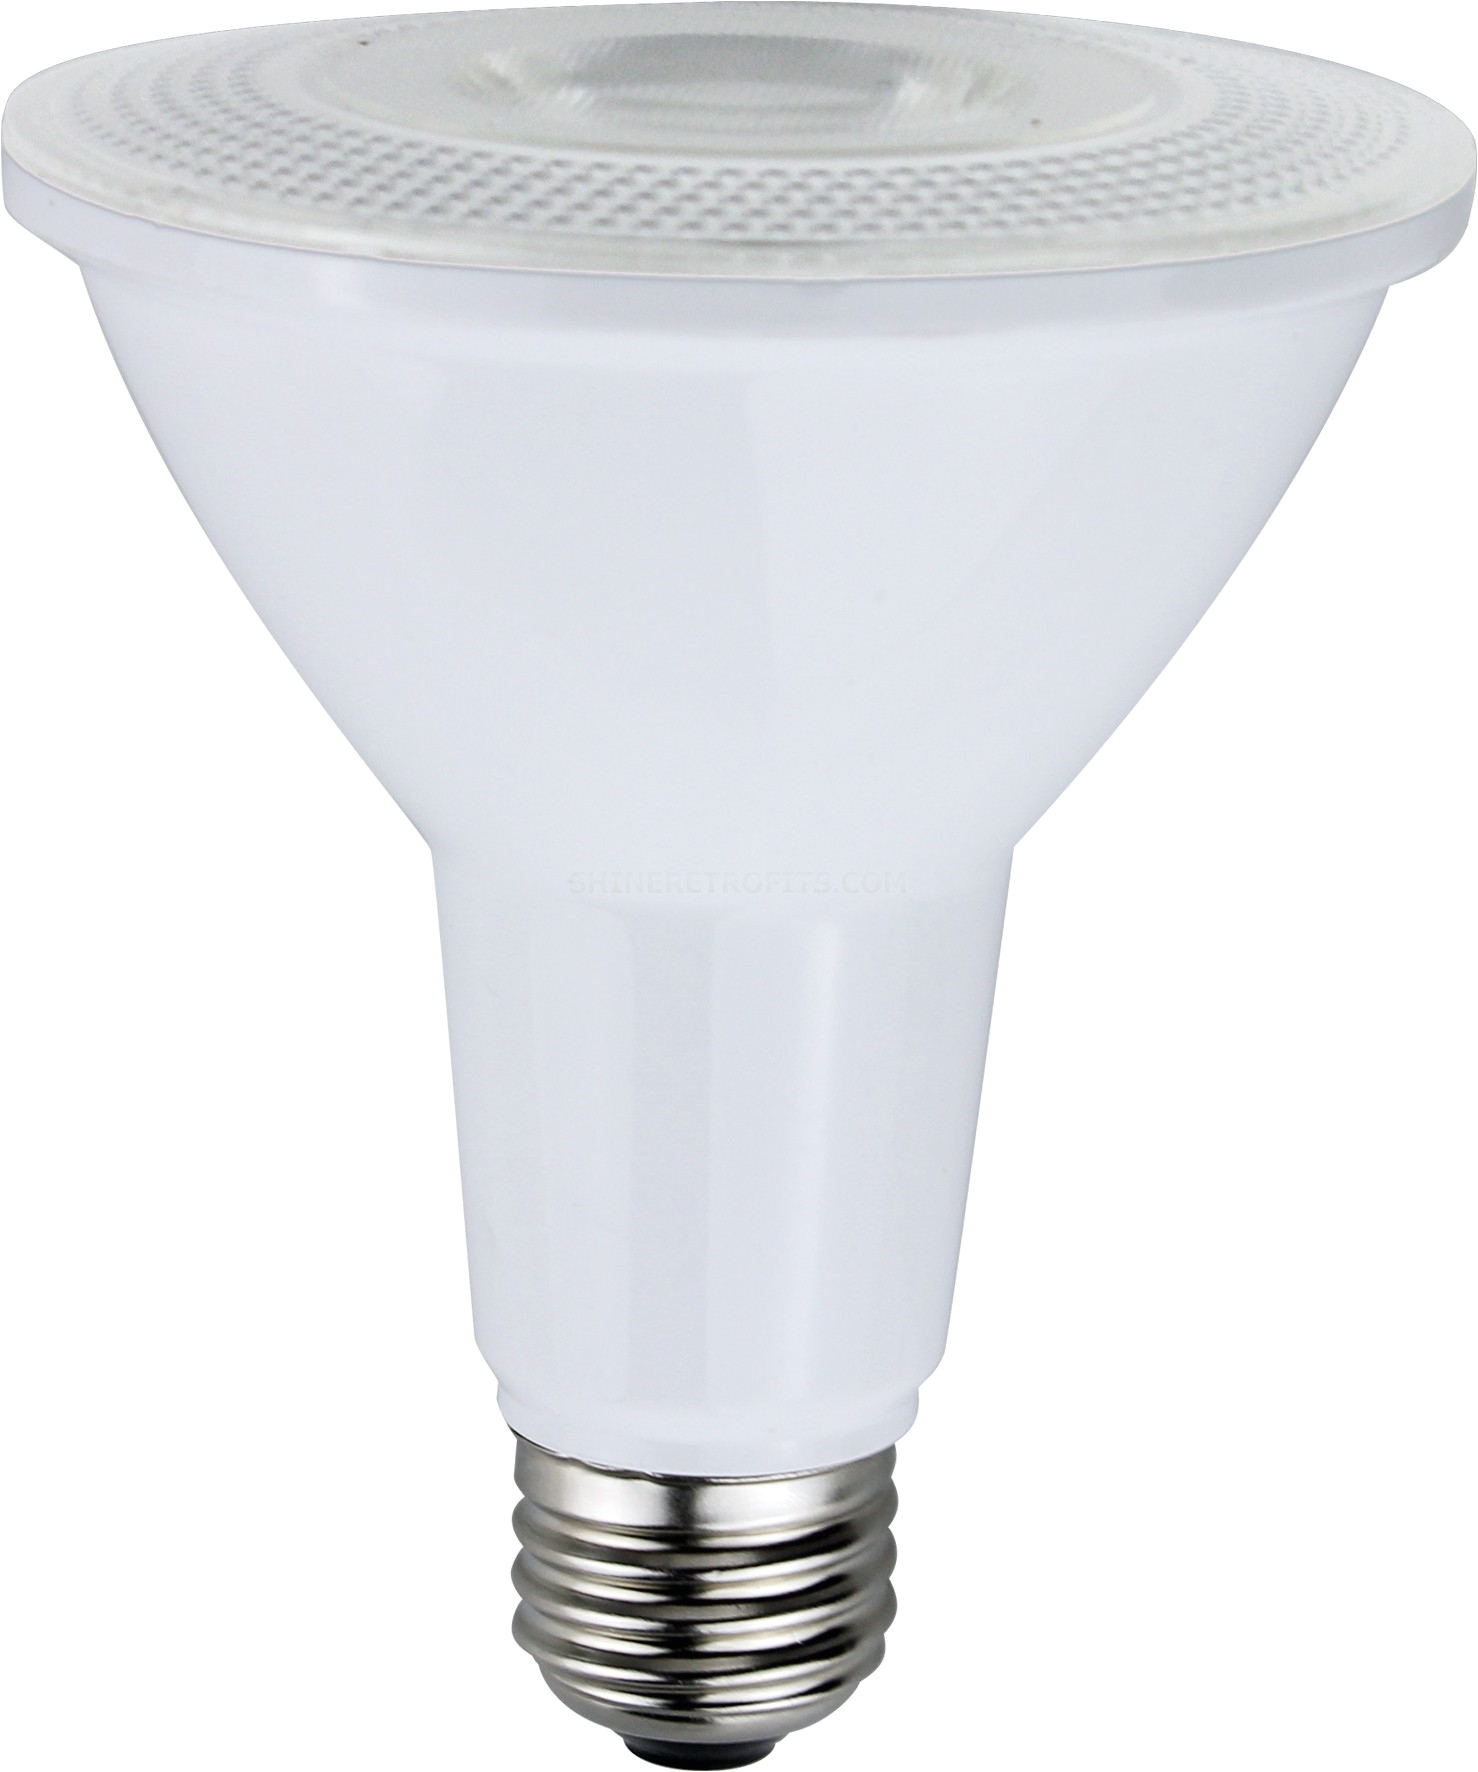 naturaled led10par30l od 80l fl energy star rated 10 watt par30l led dimmable outdoor rated long neck replacement lamp